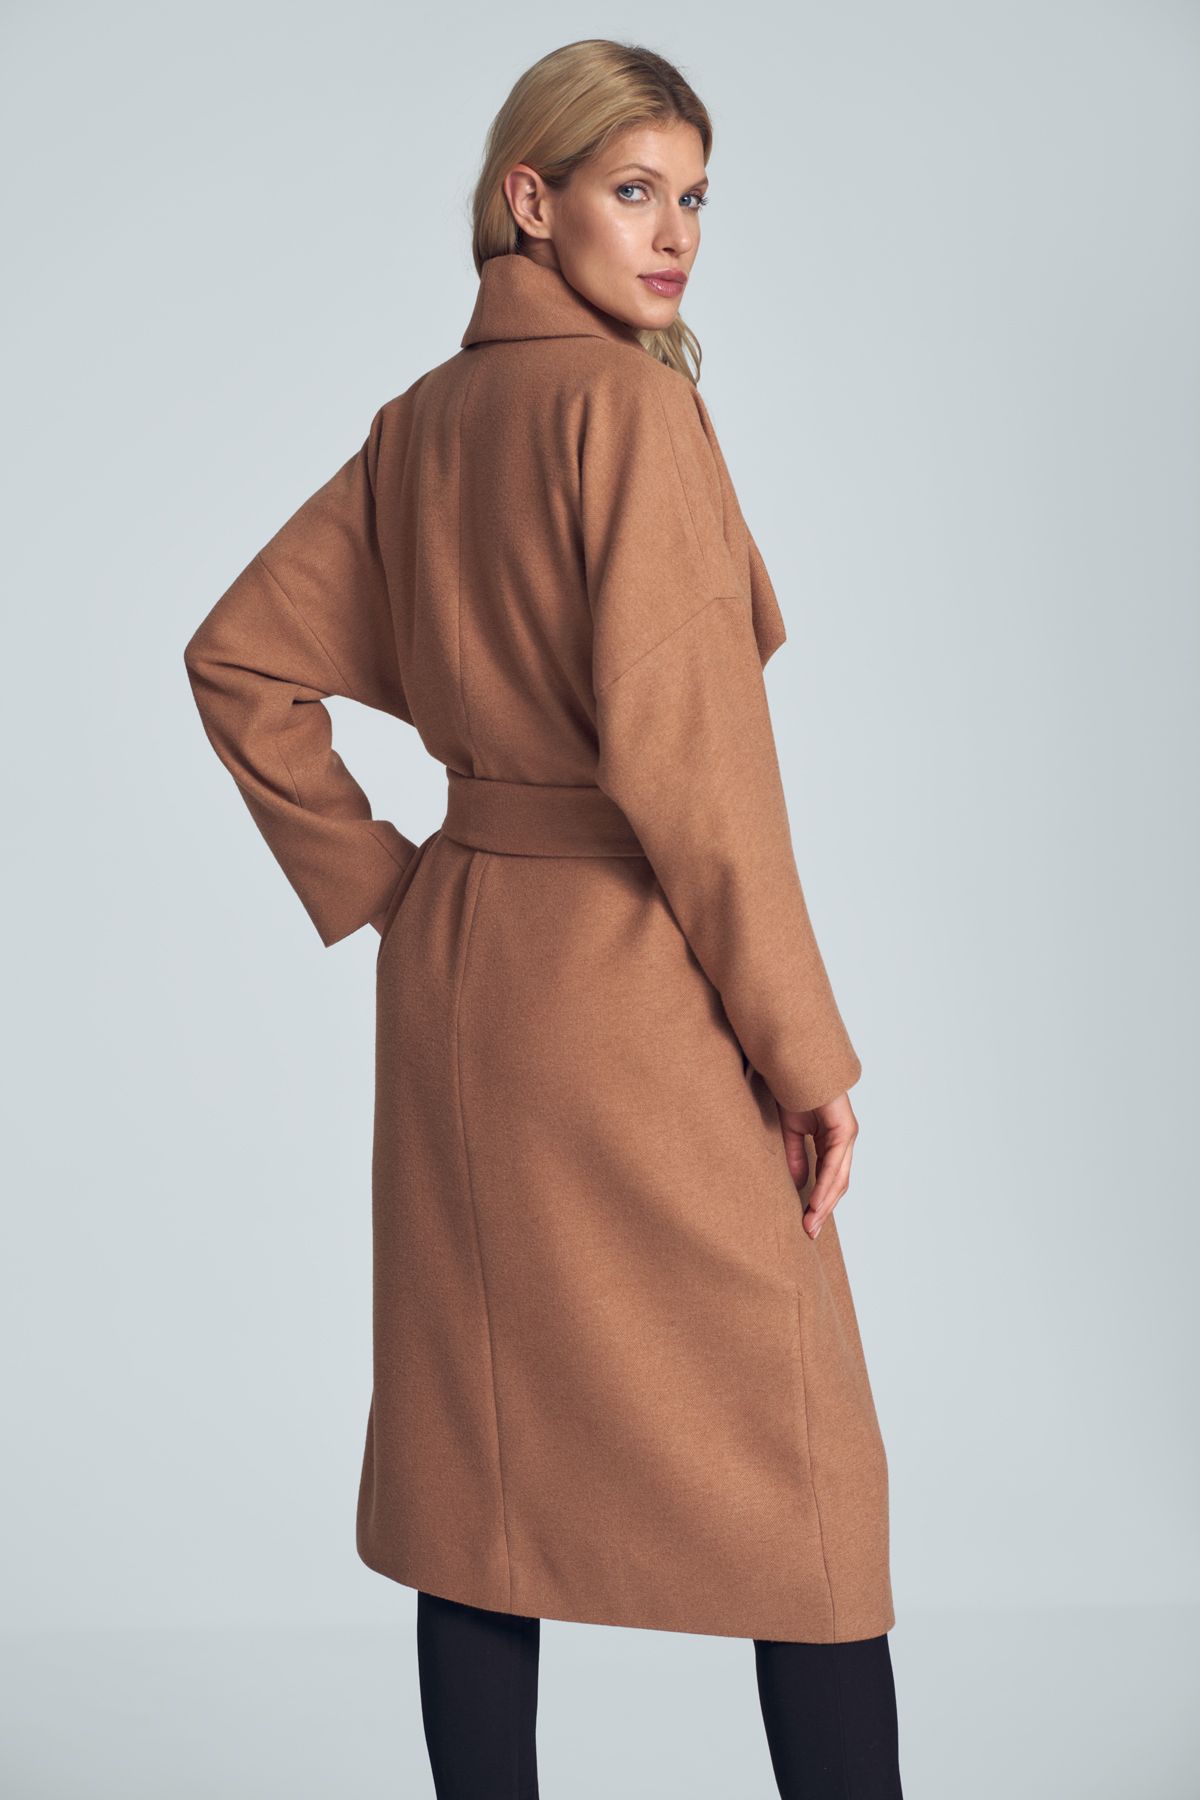 Beige autumn coat, 7/8 length, with a large loose collar with a lining, tied at the waist. Pockets in the side seams.  The true size of this coat is S/M.